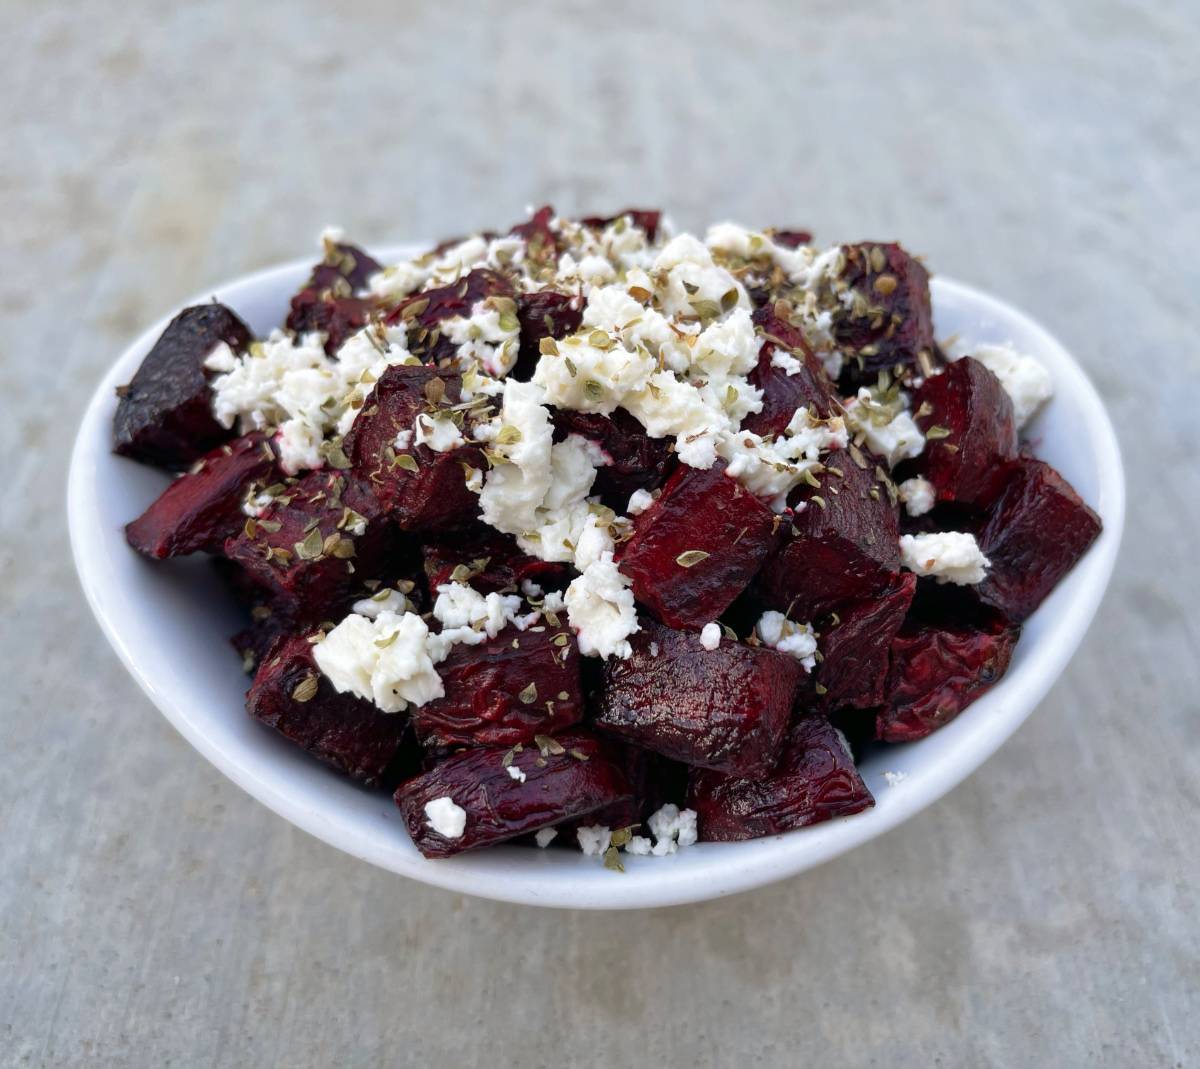 Air fryer crispy beets with crumbled feta and oregano in small white serving bowl.